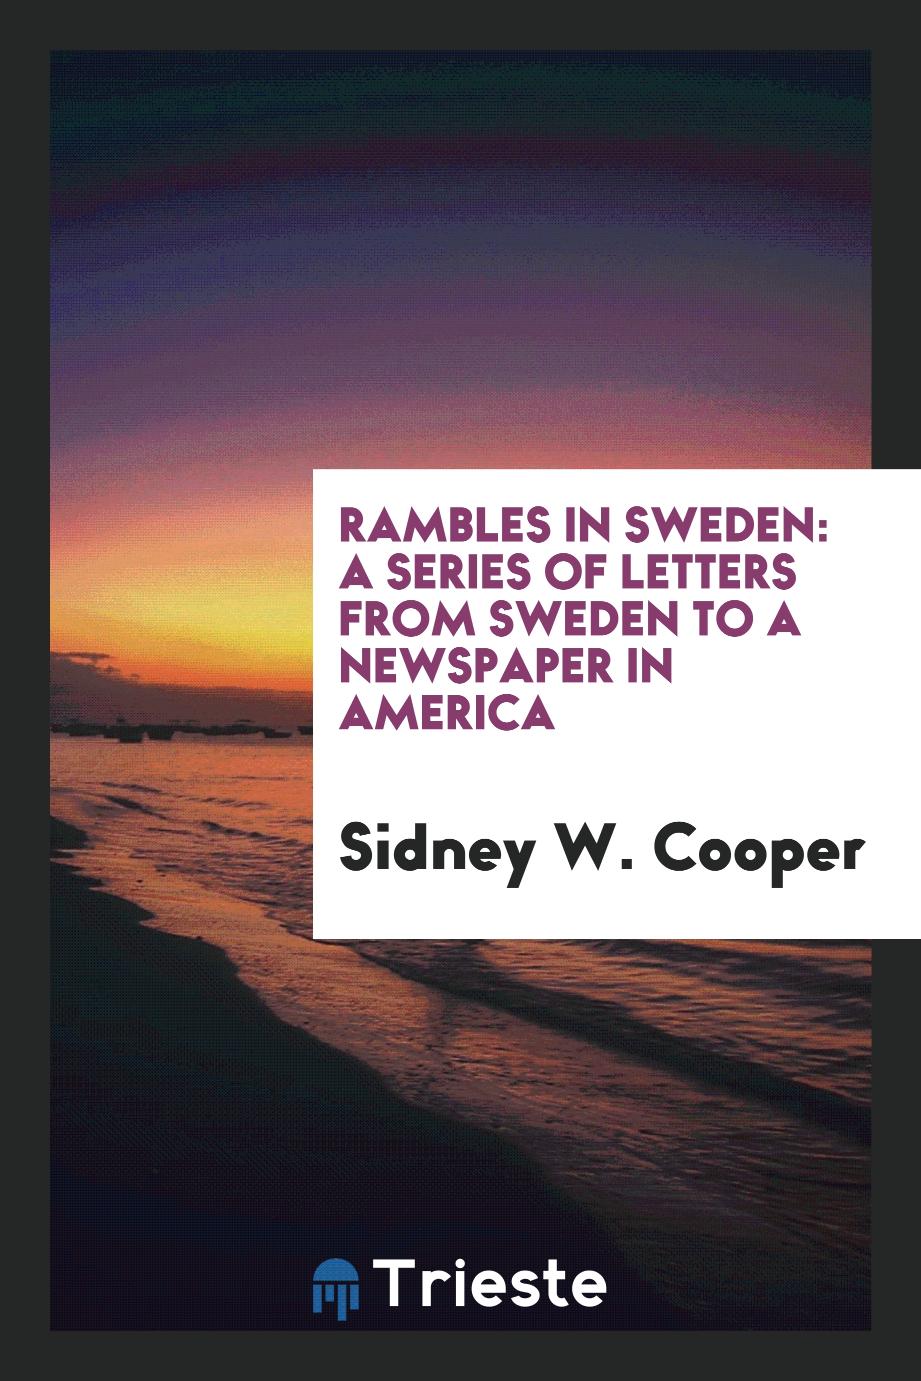 Rambles in Sweden: A Series of Letters from Sweden to a Newspaper in America